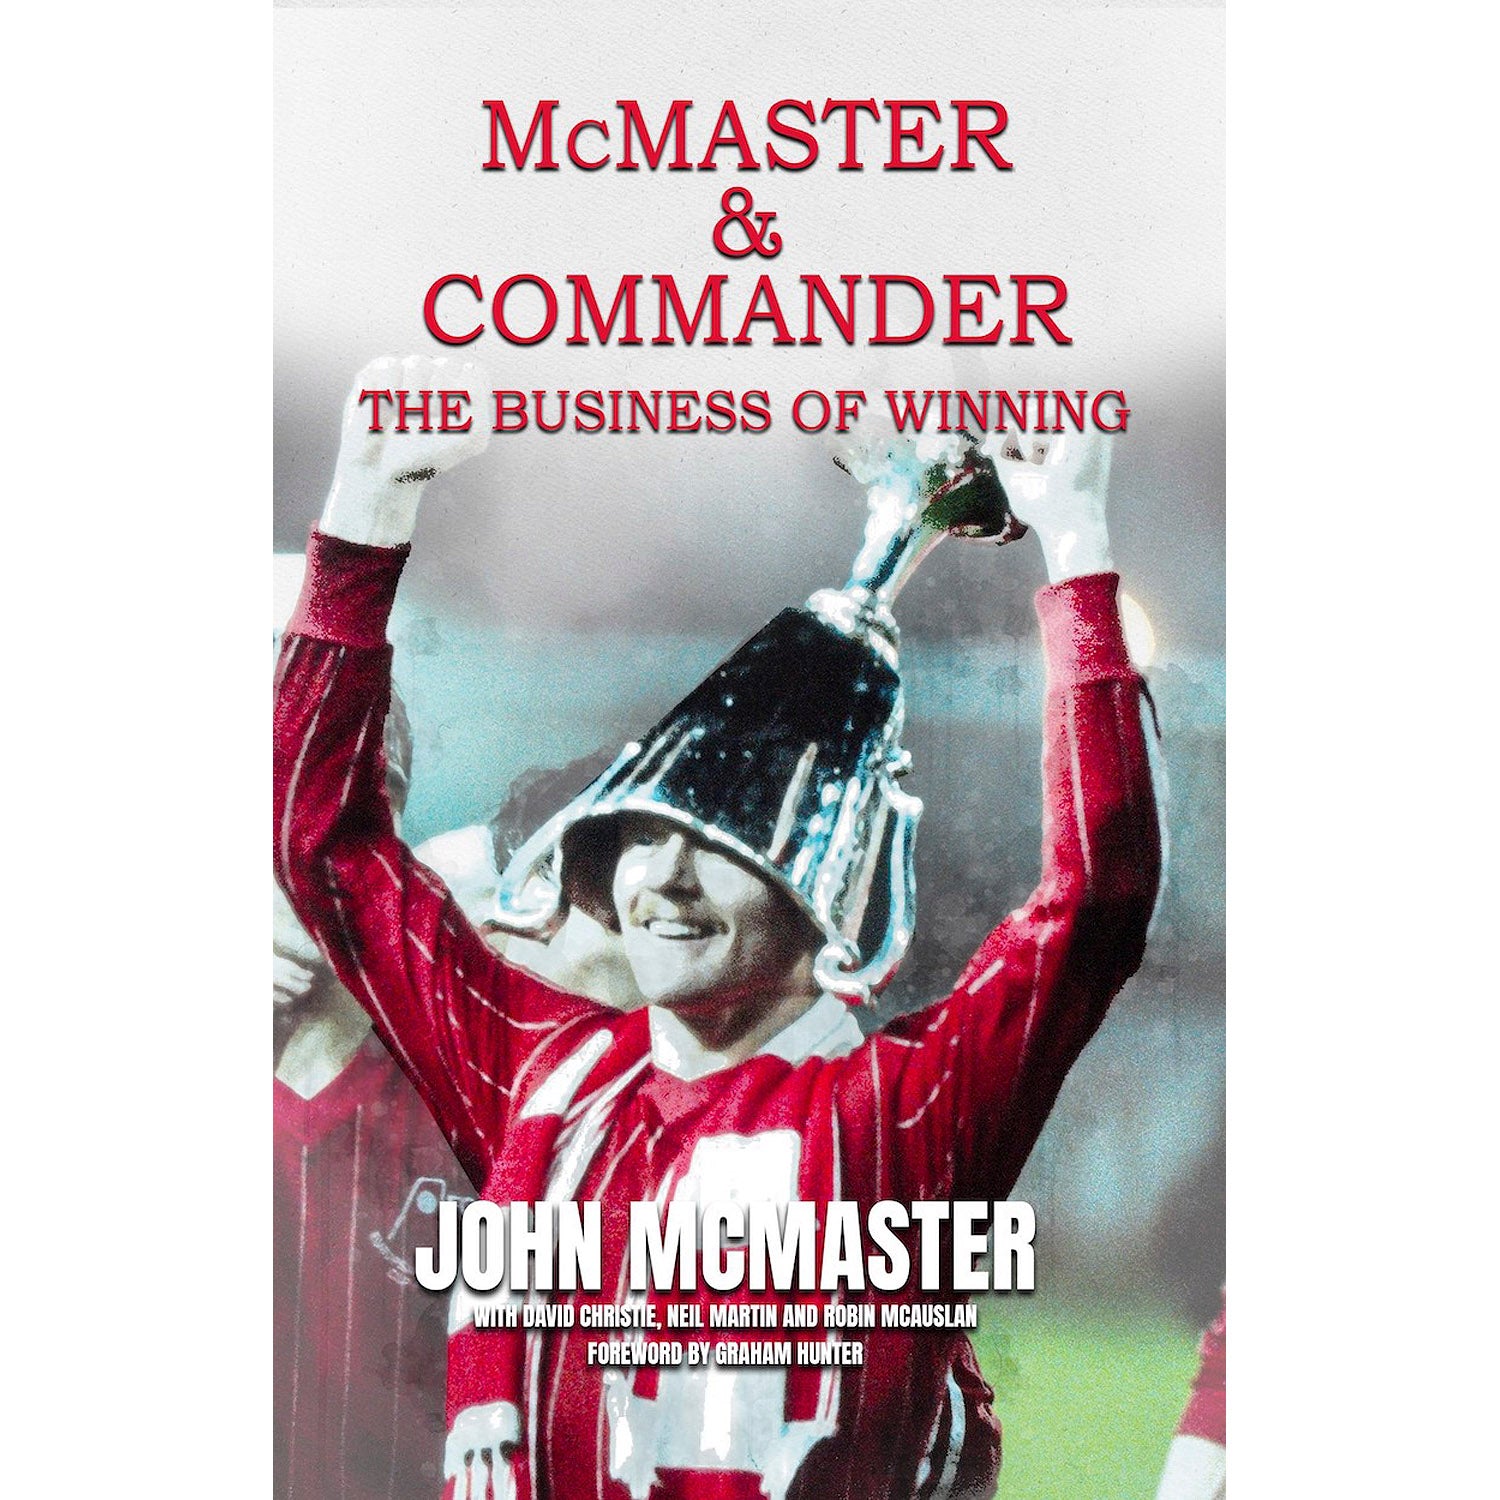 McMaster & Commander – The Business of Winning – John McMaster – SIGNED